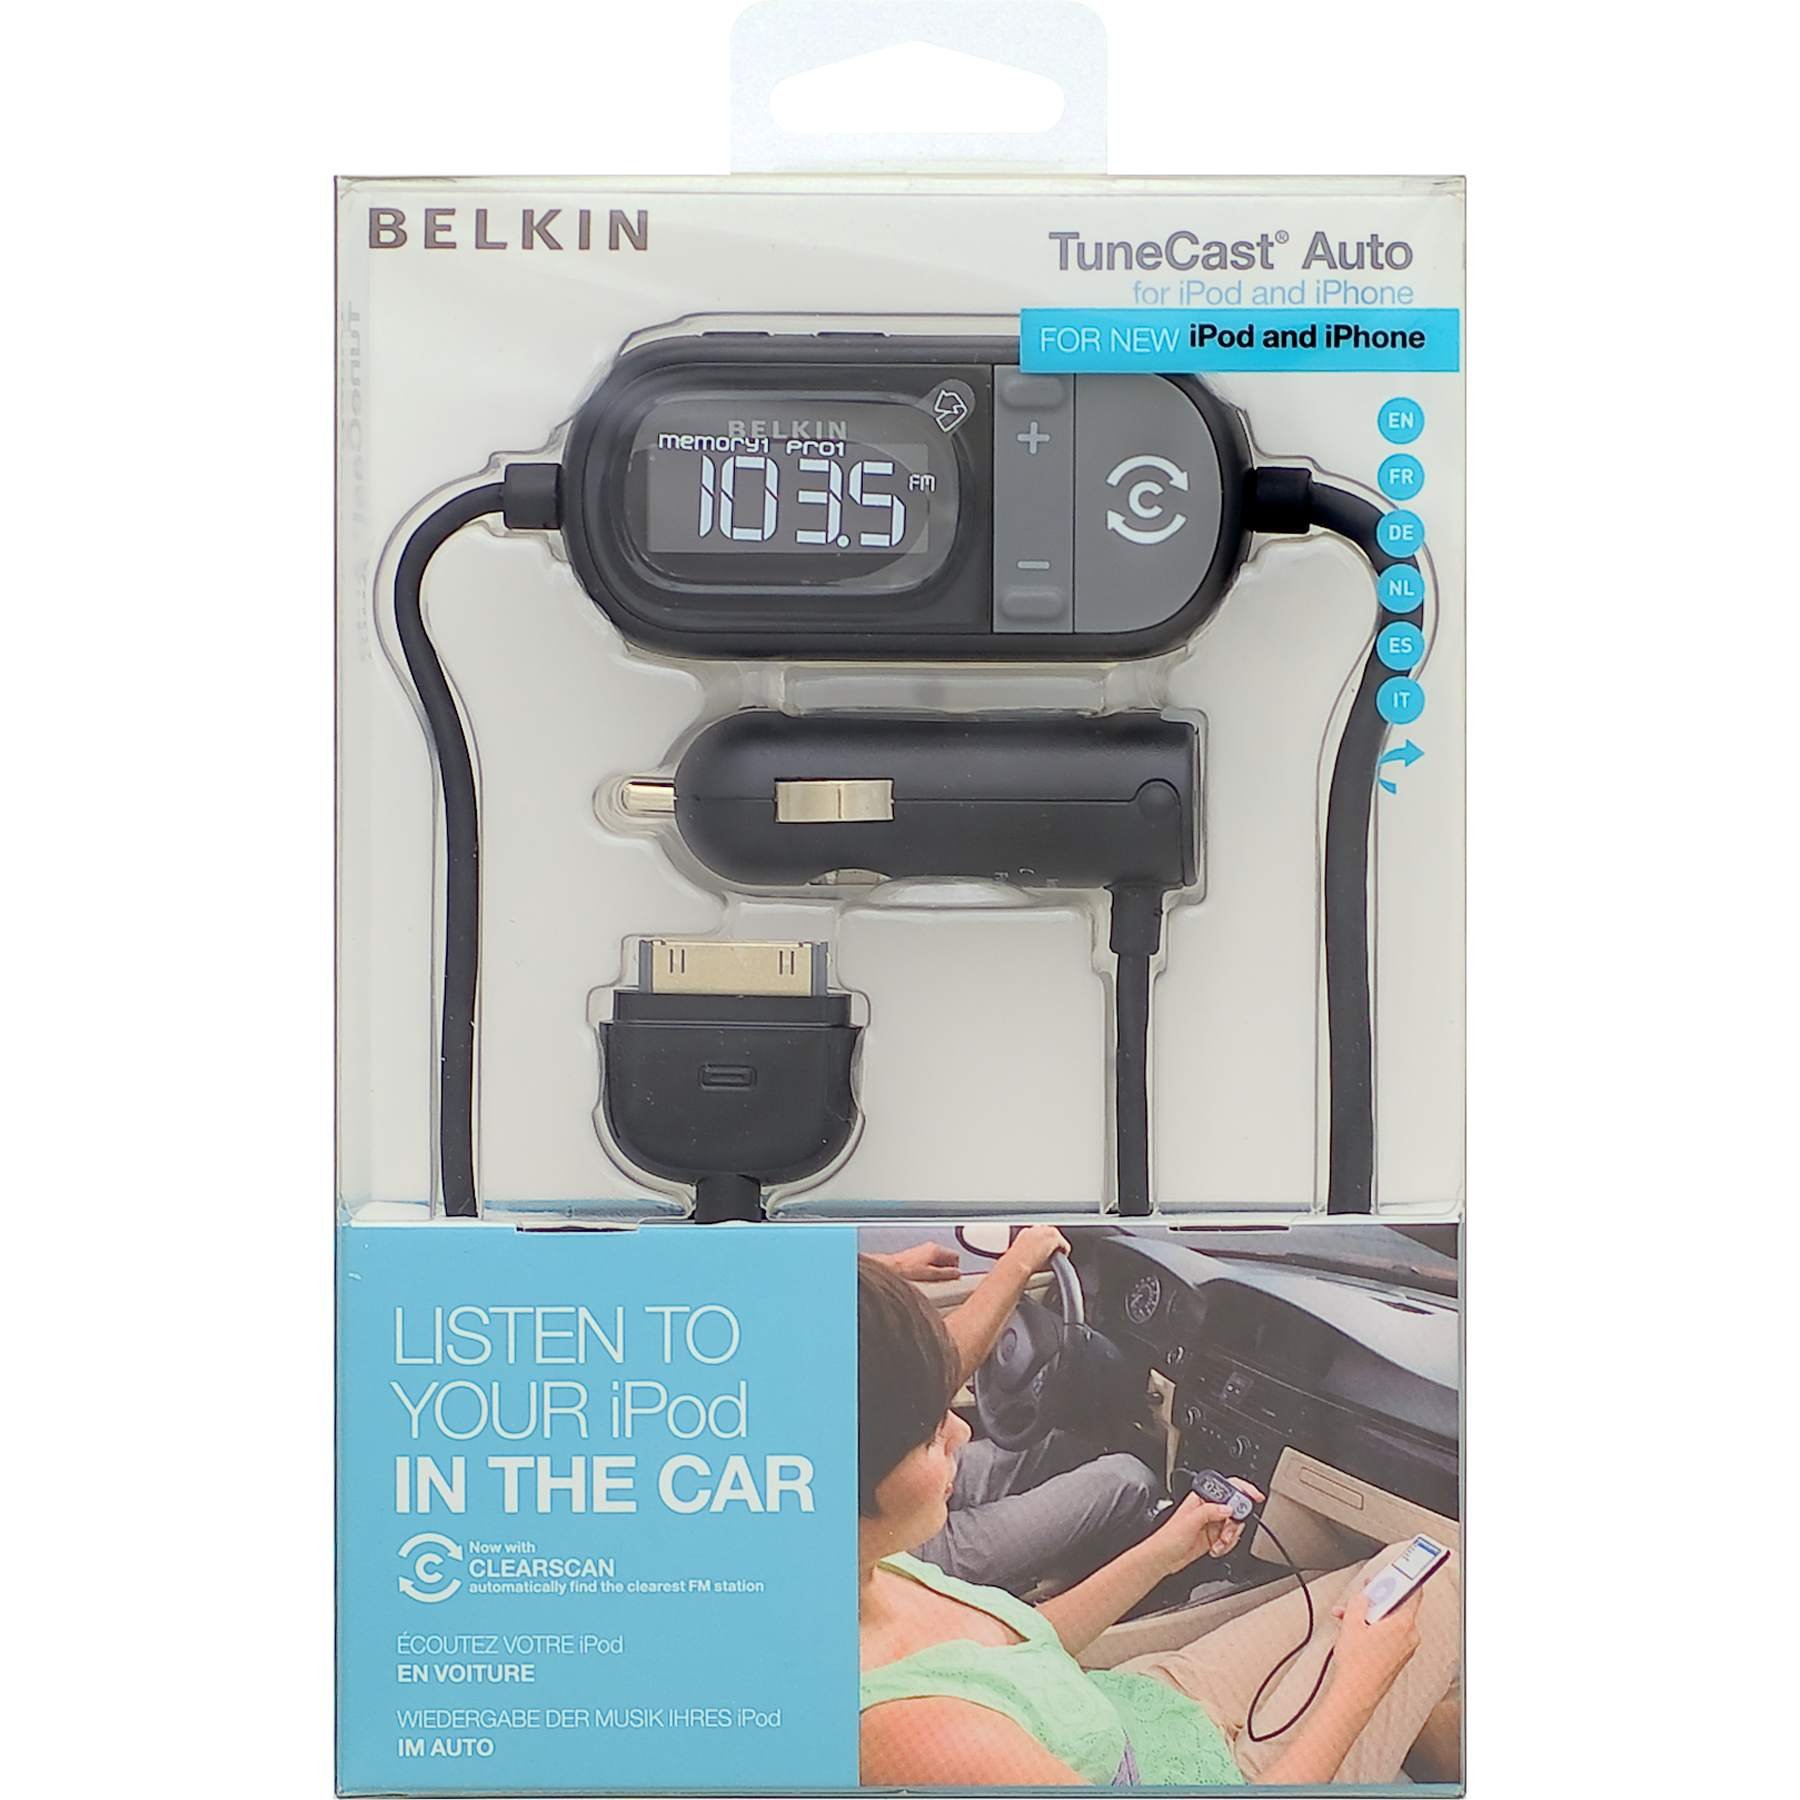 Belkin TuneCast Auto with ClearScan for iPod, iPhone 1G, 3G